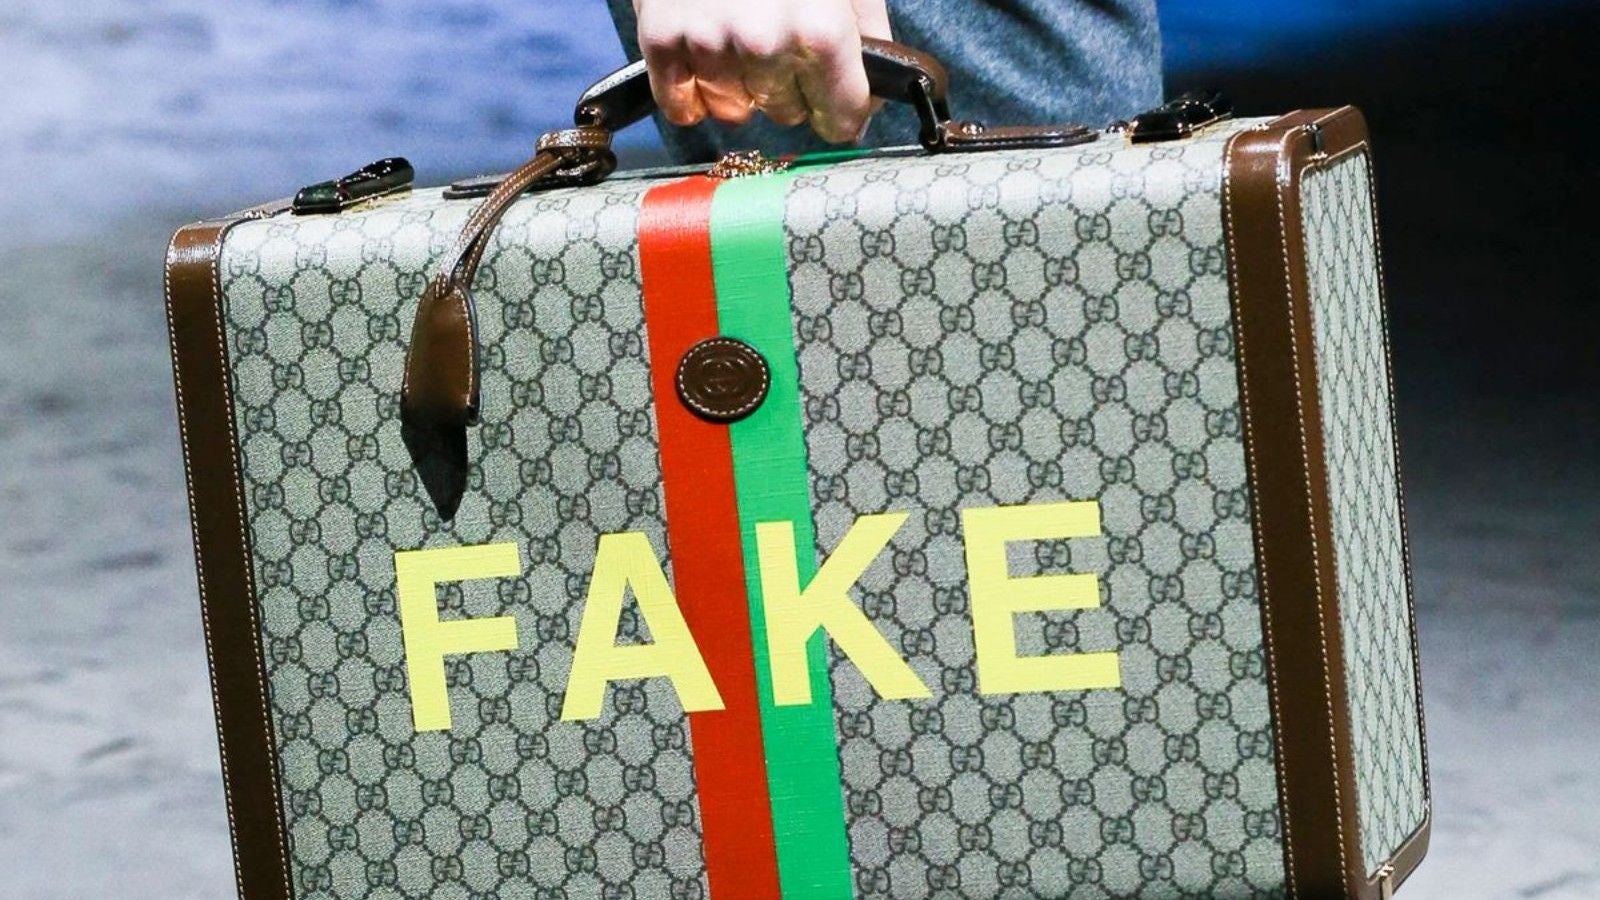 Despite significant progress on the counterfeit front, it’s still easy for Chinese consumers to acquire any counterfeits they want. So what can brands do? Photo: Courtesy of Gucci